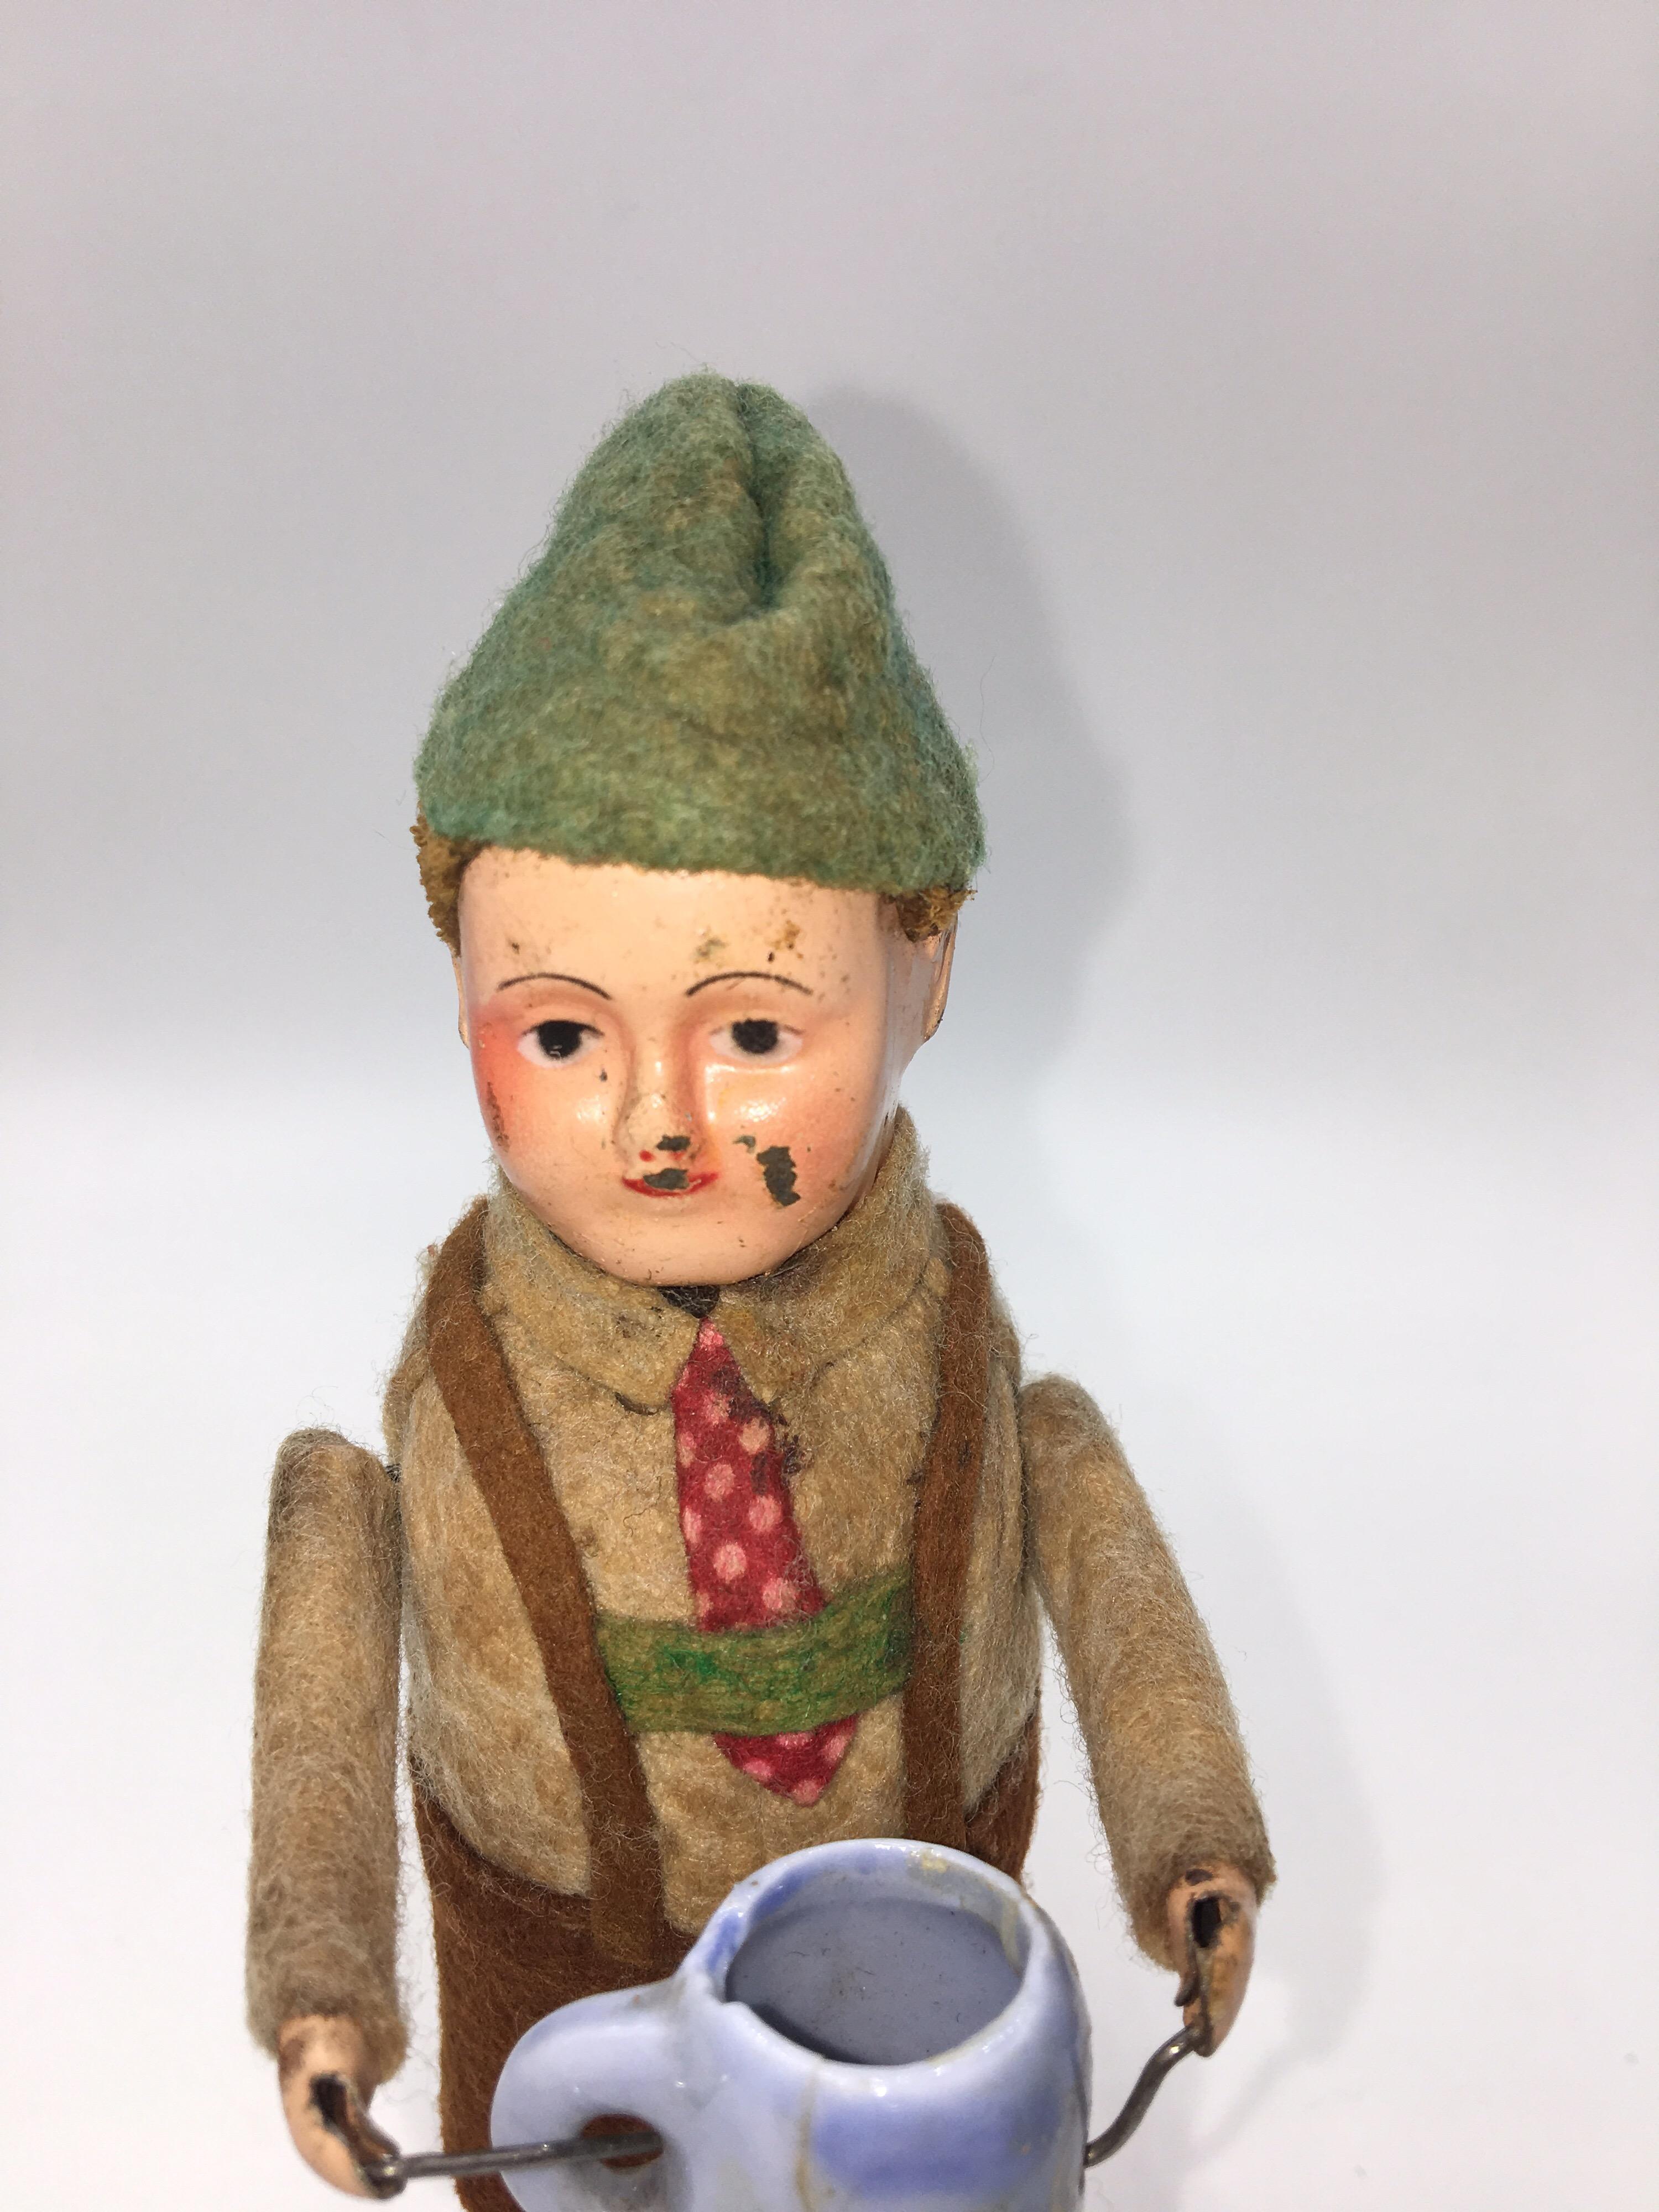 Schuco tin wind up young man drinking from German bisque stein, circa 1930
Made in Germany, pre-war period.